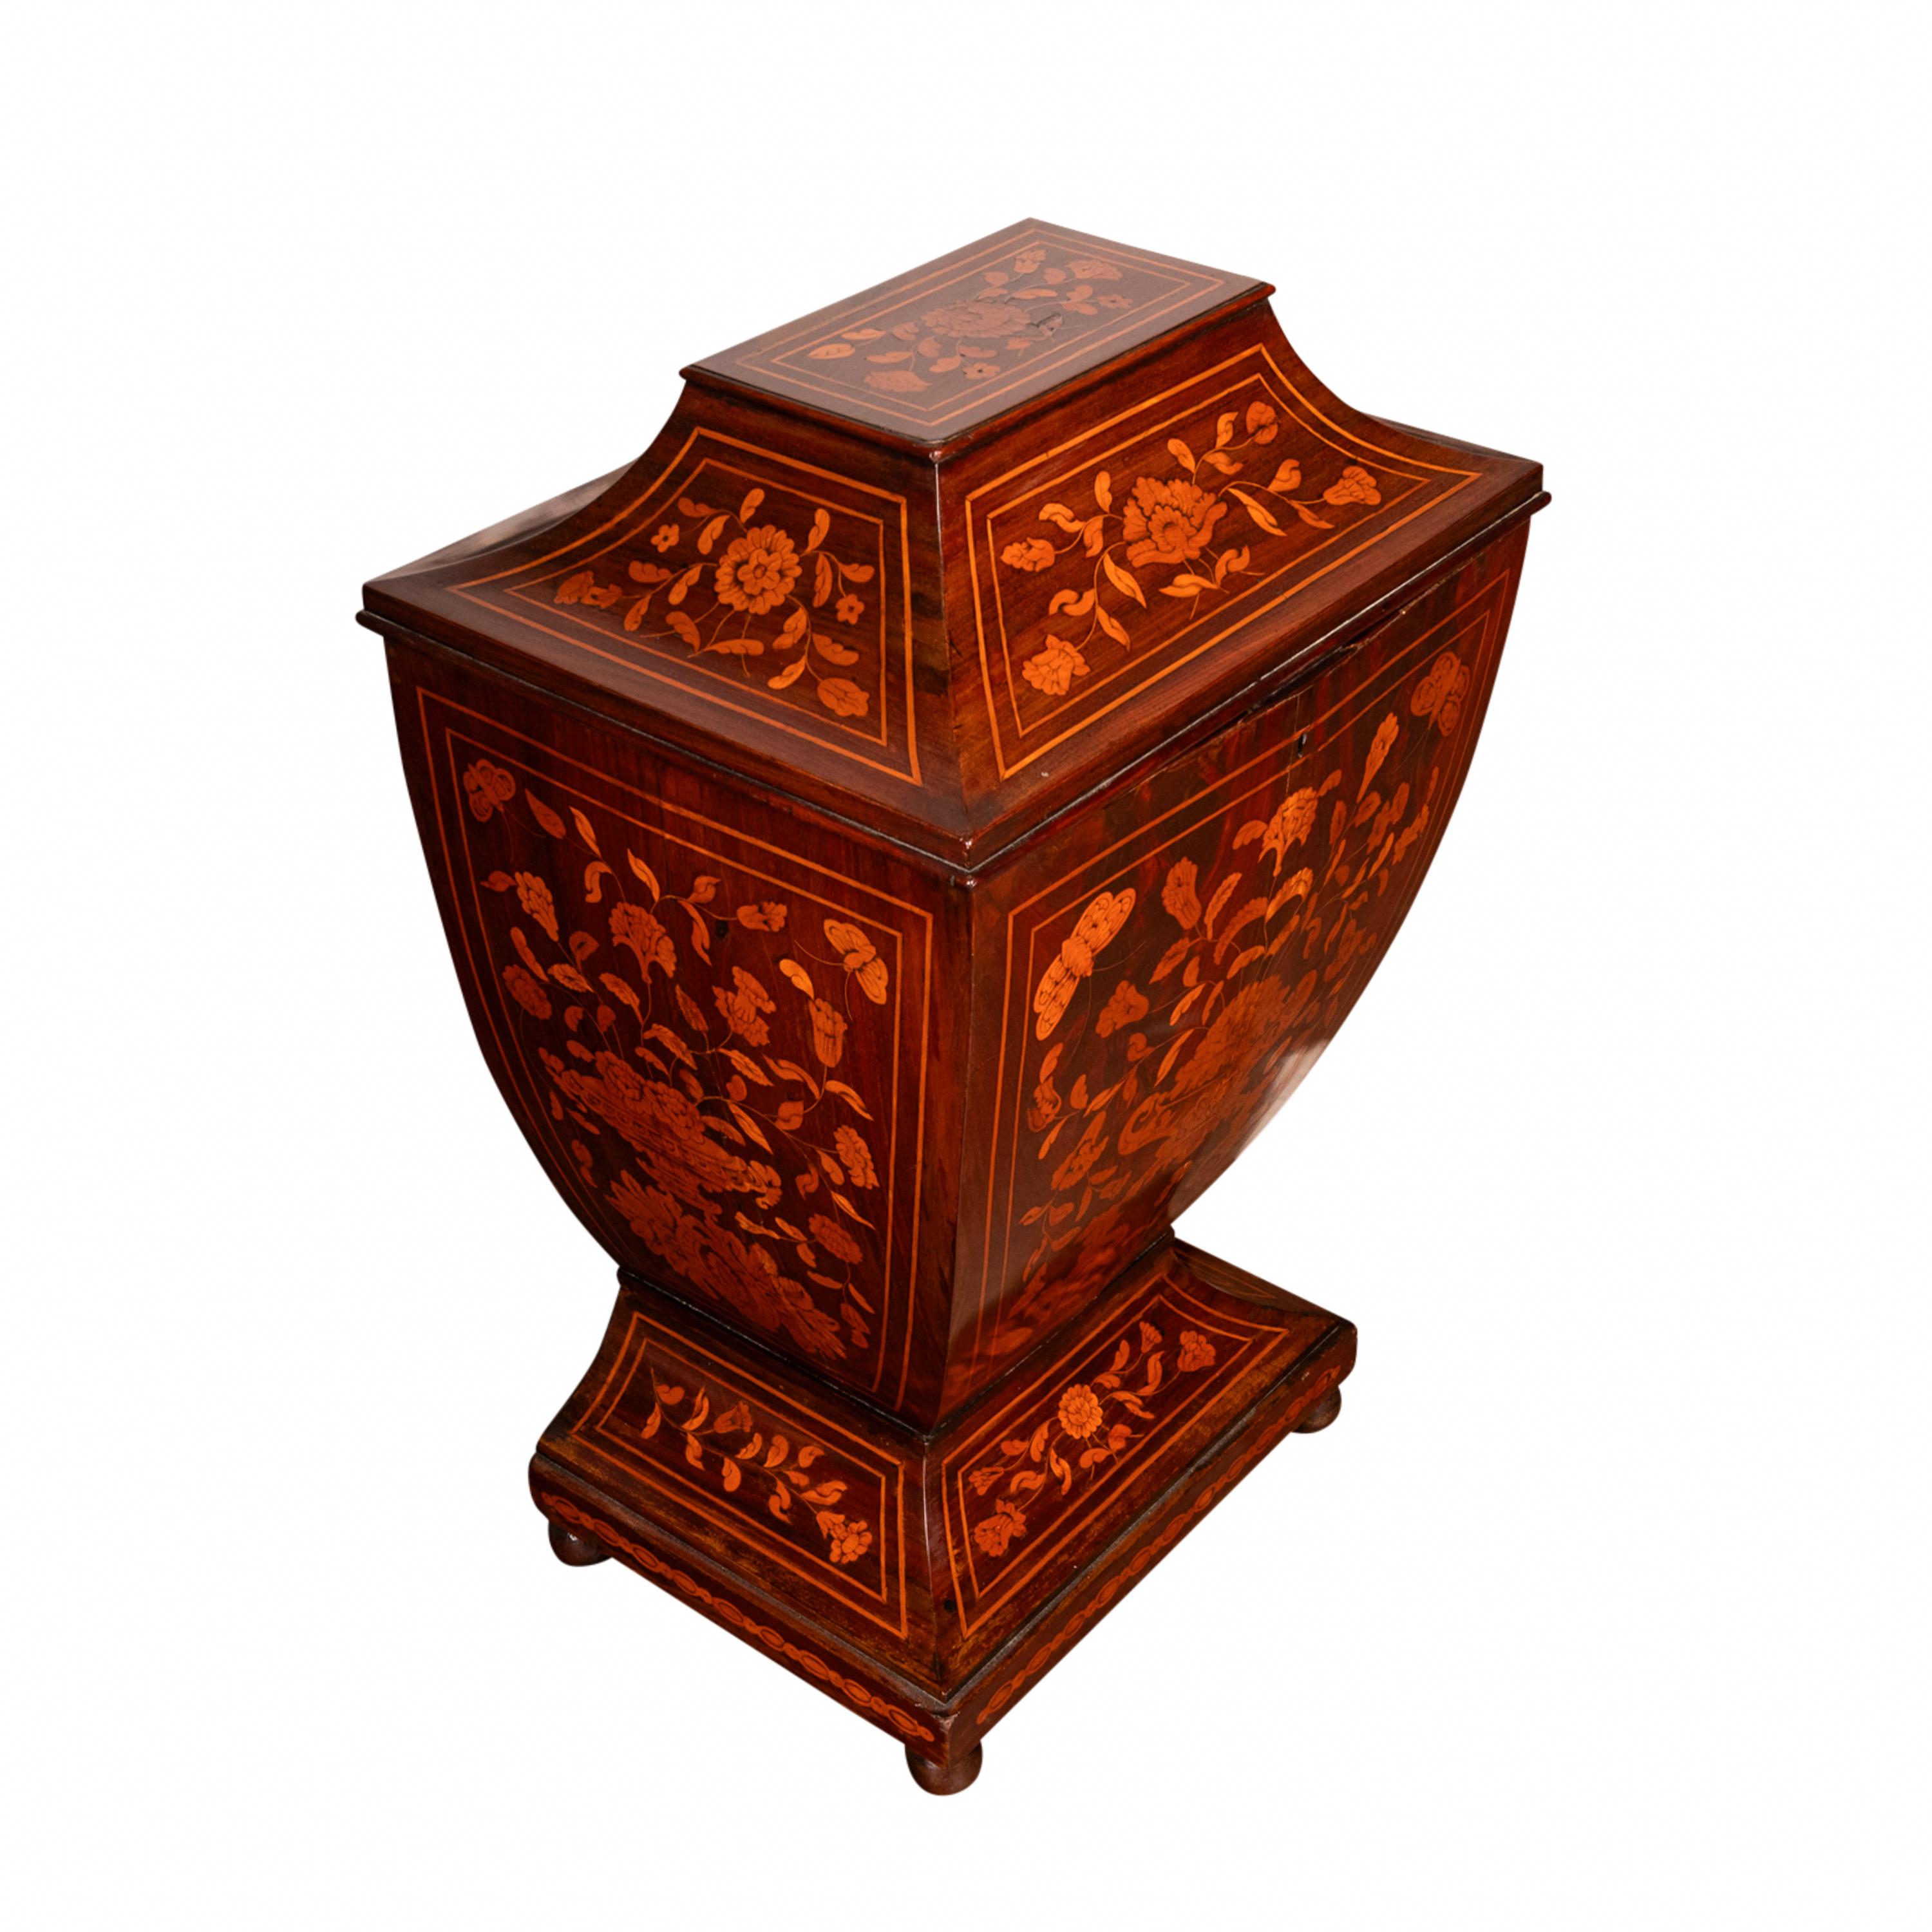 Antique 18th Century Dutch Marquetry Bombe Shaped Wine Cellerette Cooler 1760 For Sale 3